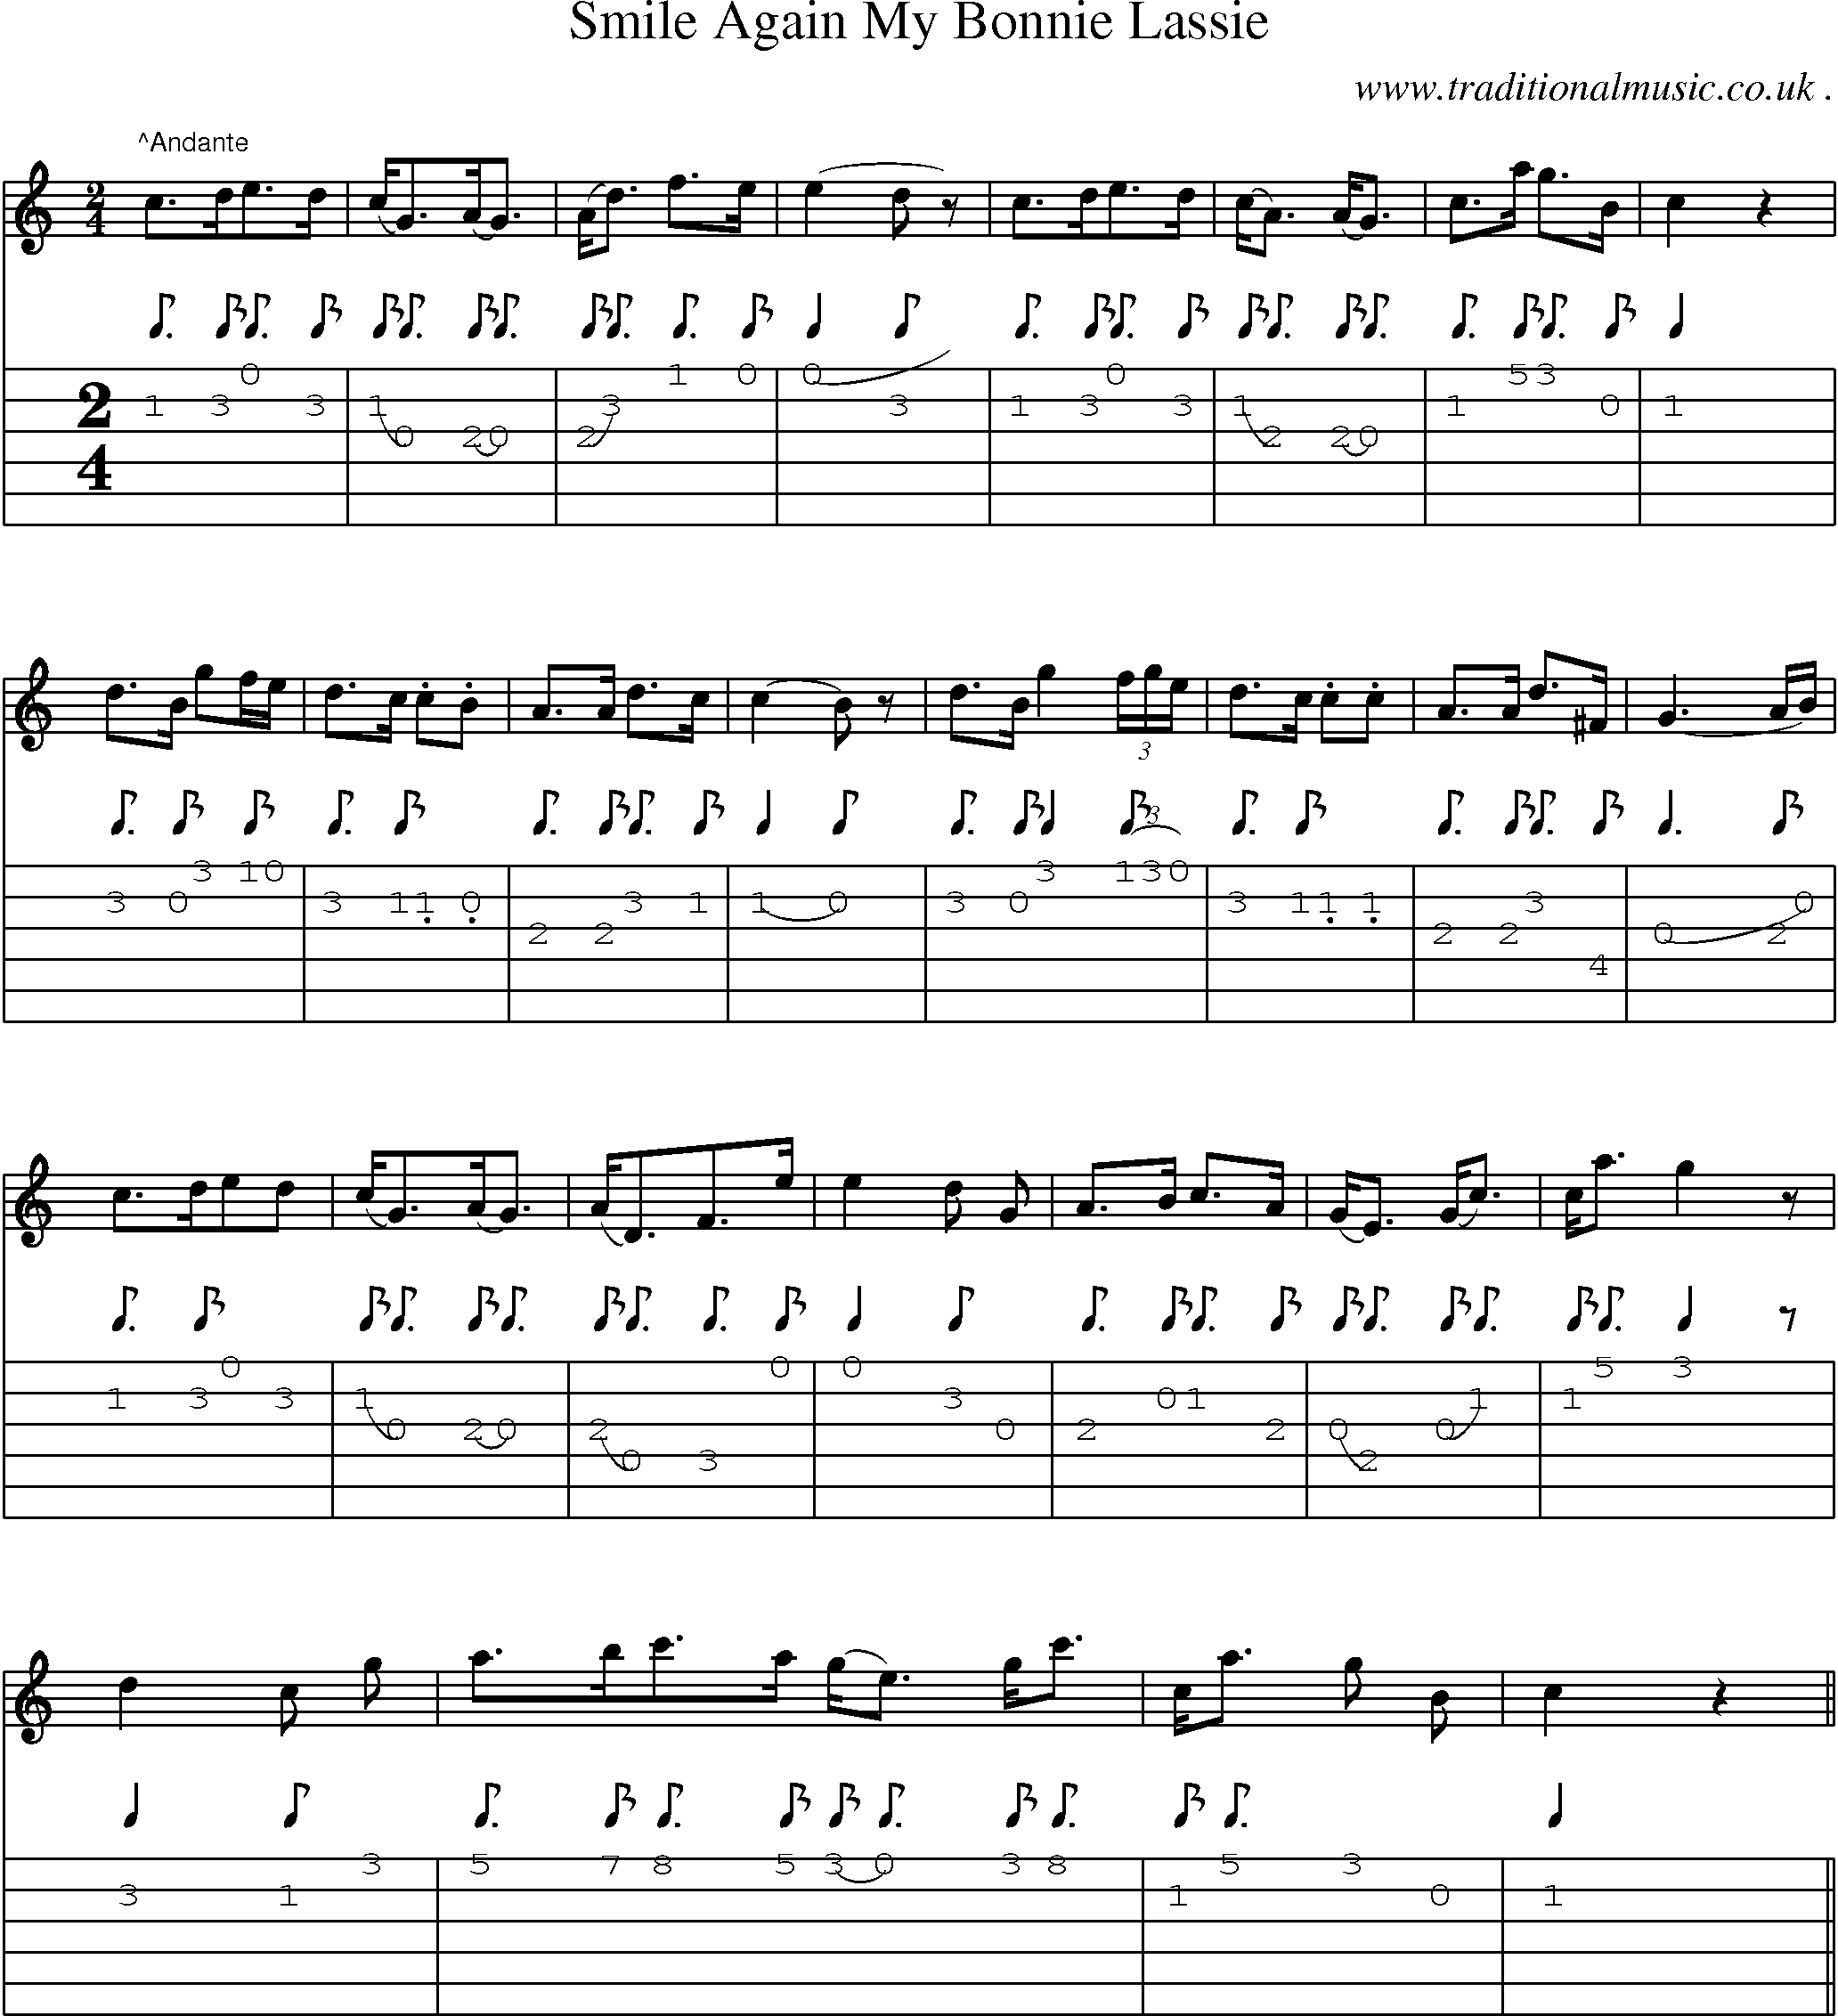 Sheet-Music and Guitar Tabs for Smile Again My Bonnie Lassie